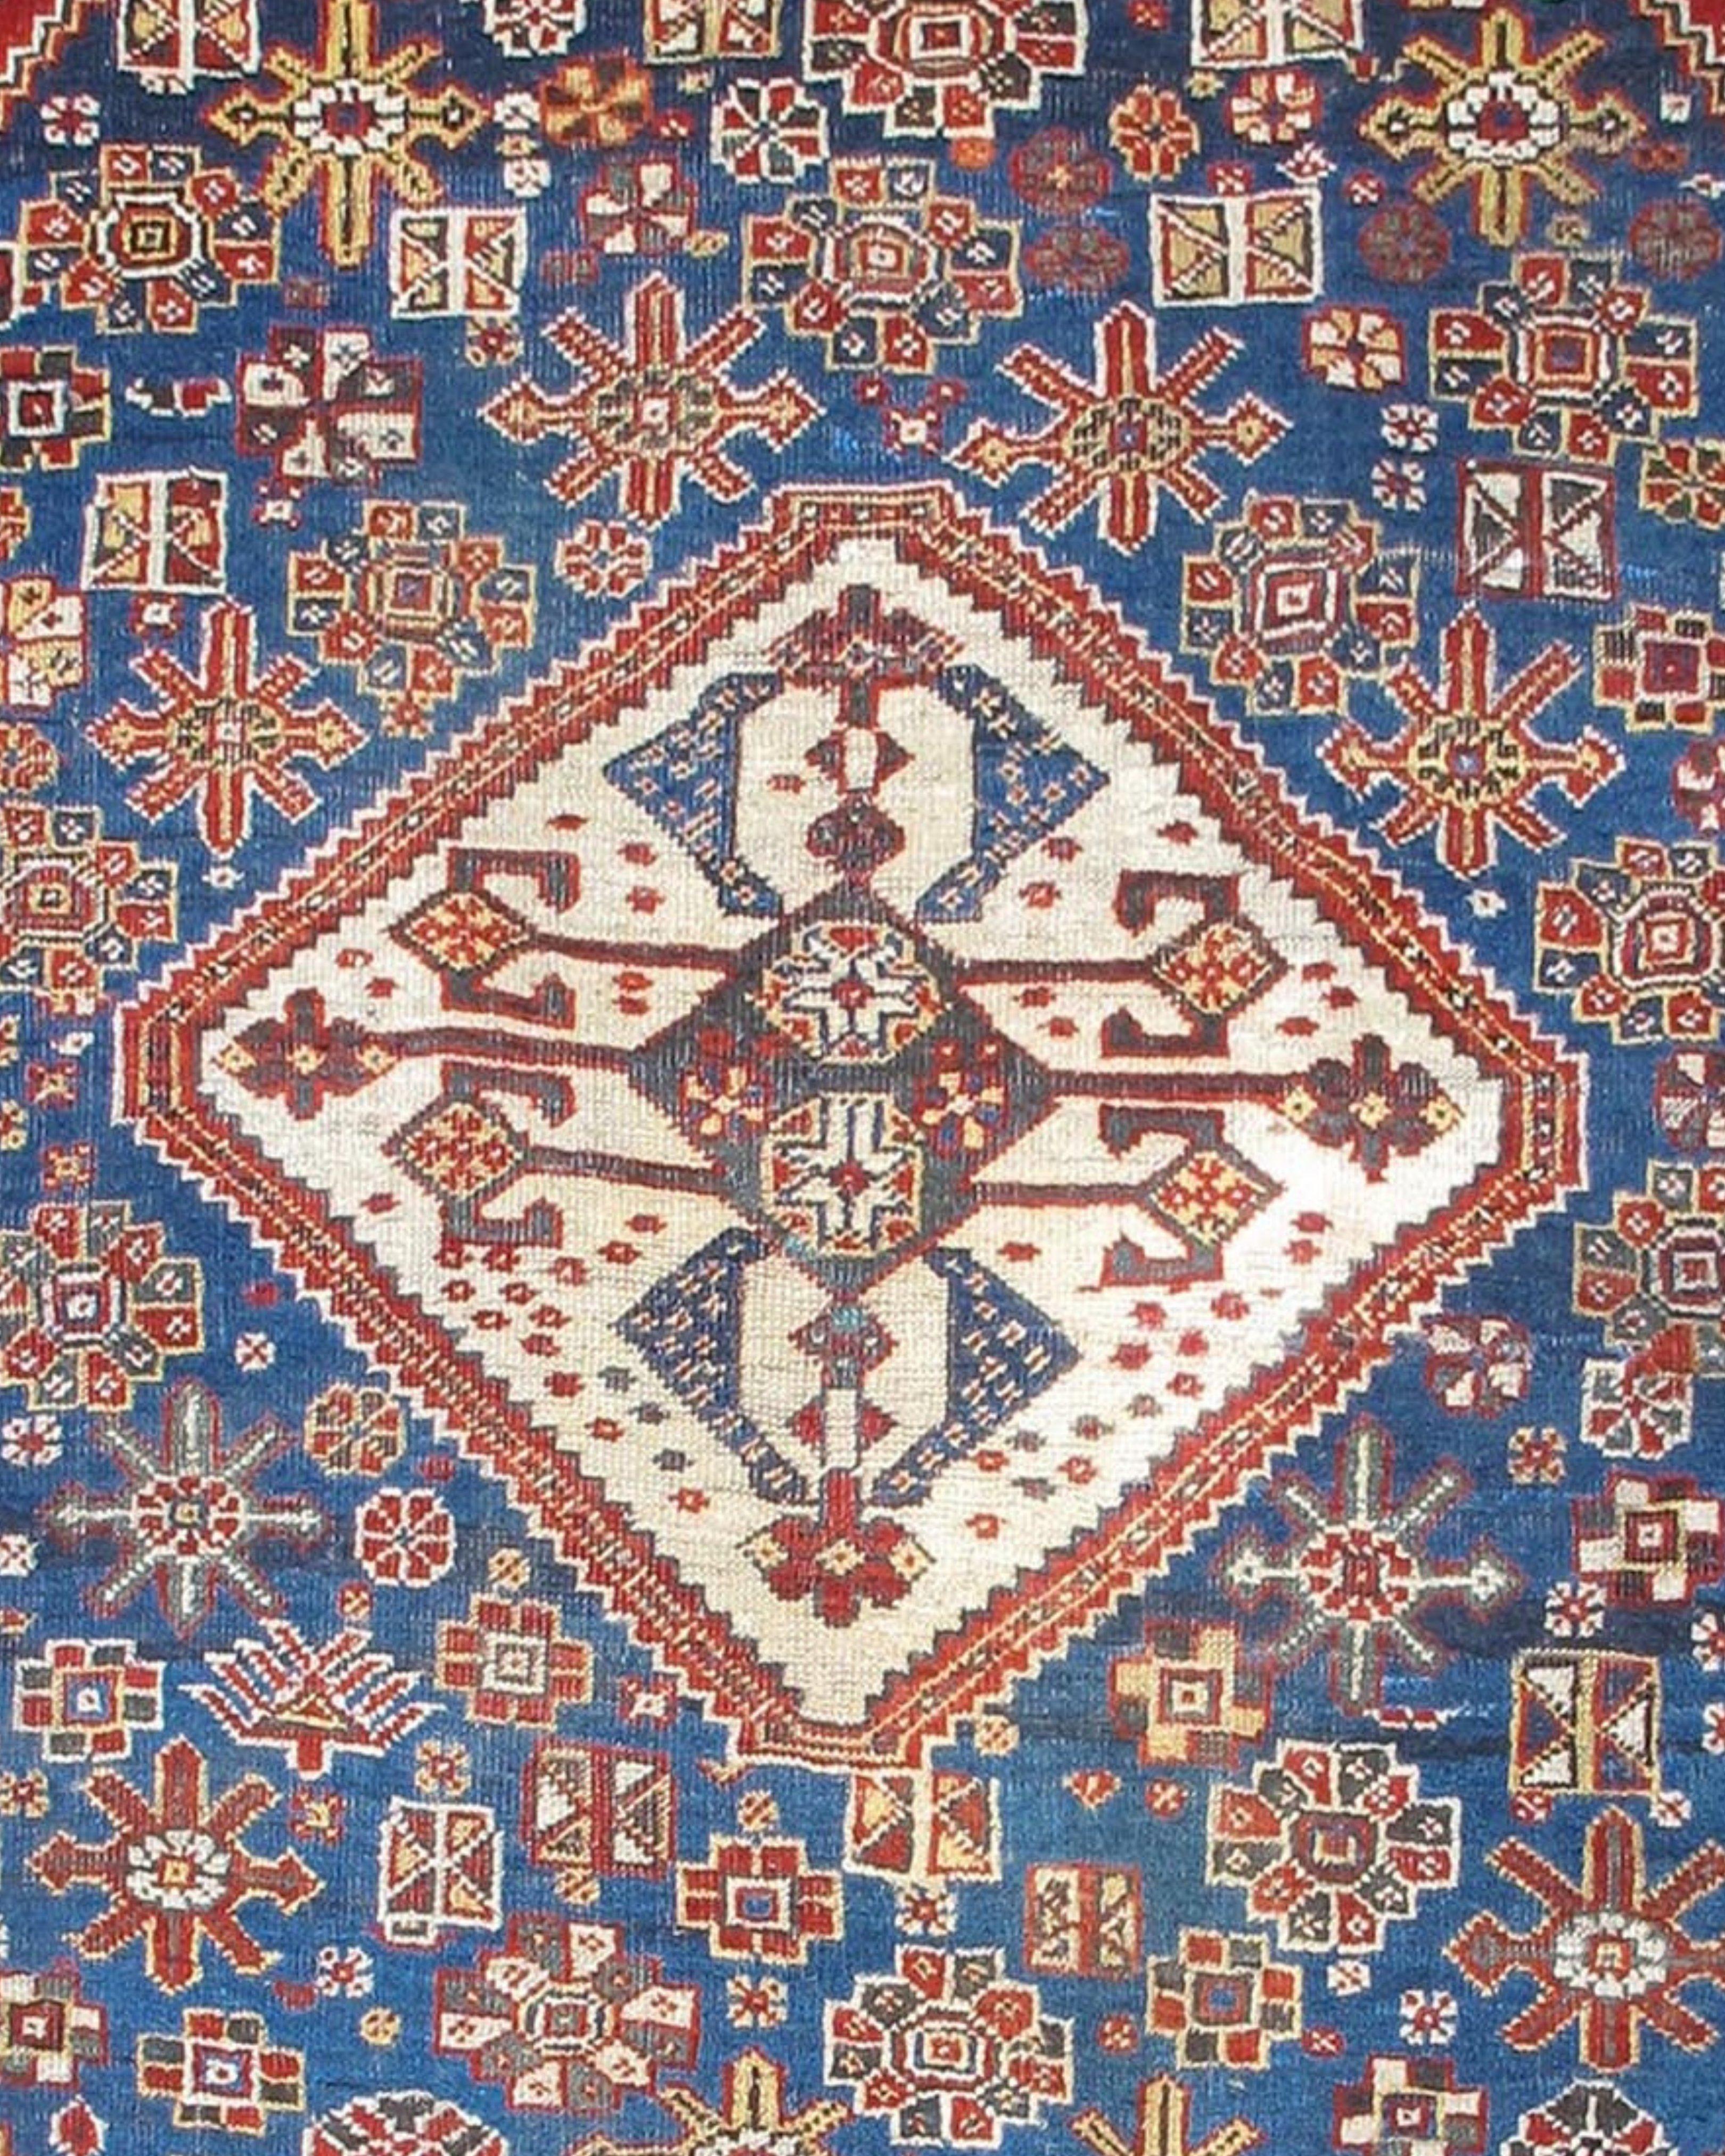 Antique Southwest Persian Qashqai Rug, c. 1900

Gorgeous floral designs in a nomadic/tribal style.

Additional Information:
Dimensions: 4'2